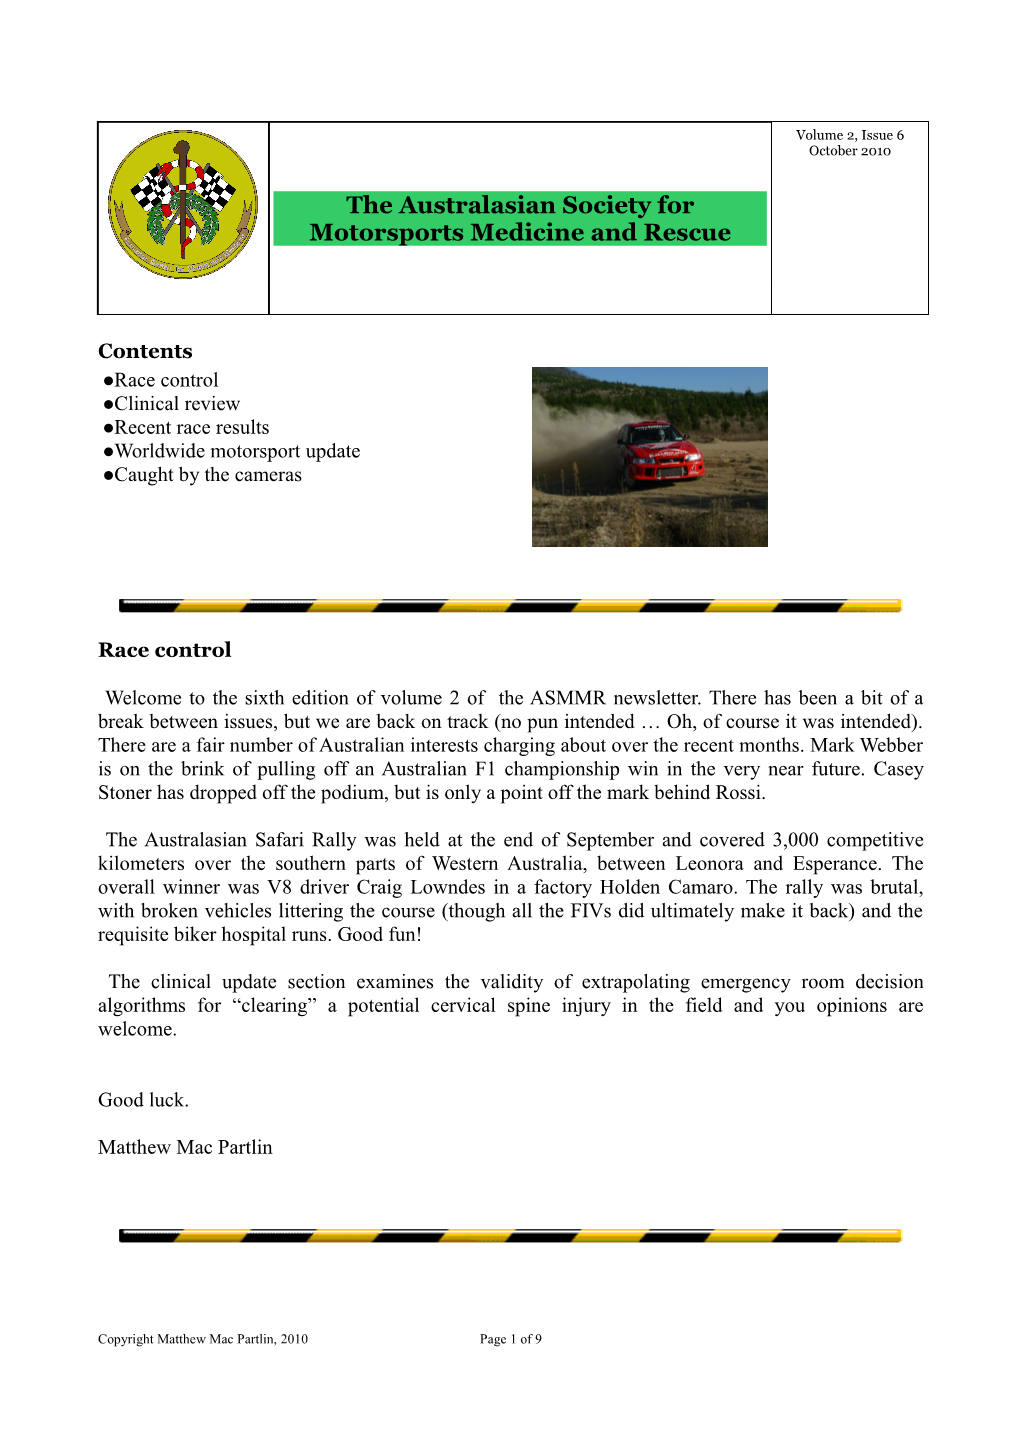 The Australasian Society for Motorsports Medicine and Rescue